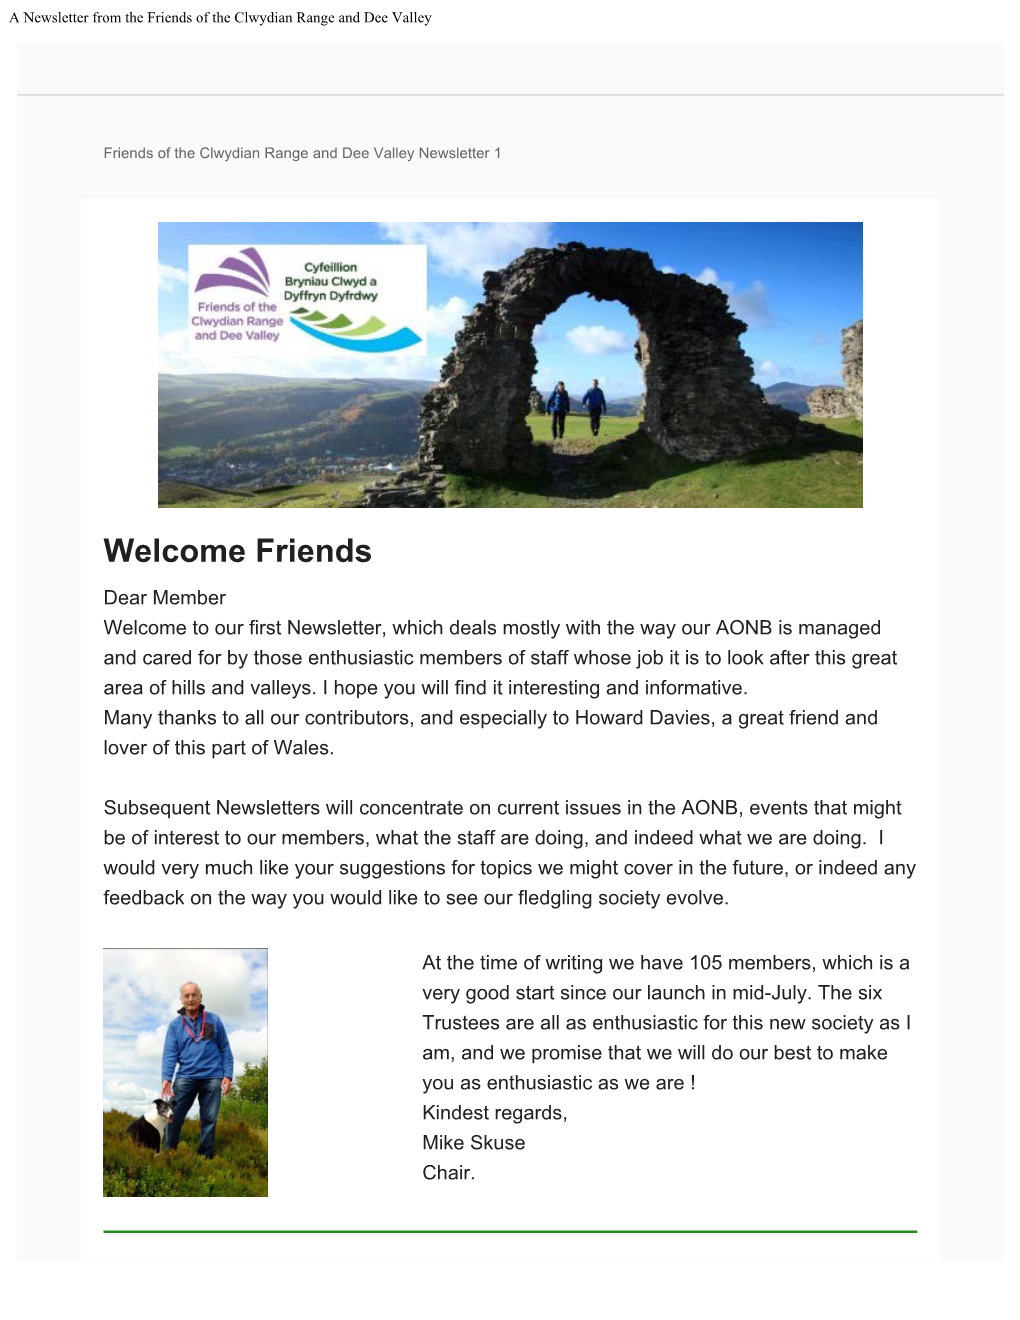 A Newsletter from the Friends of the Clwydian Range and Dee Valley